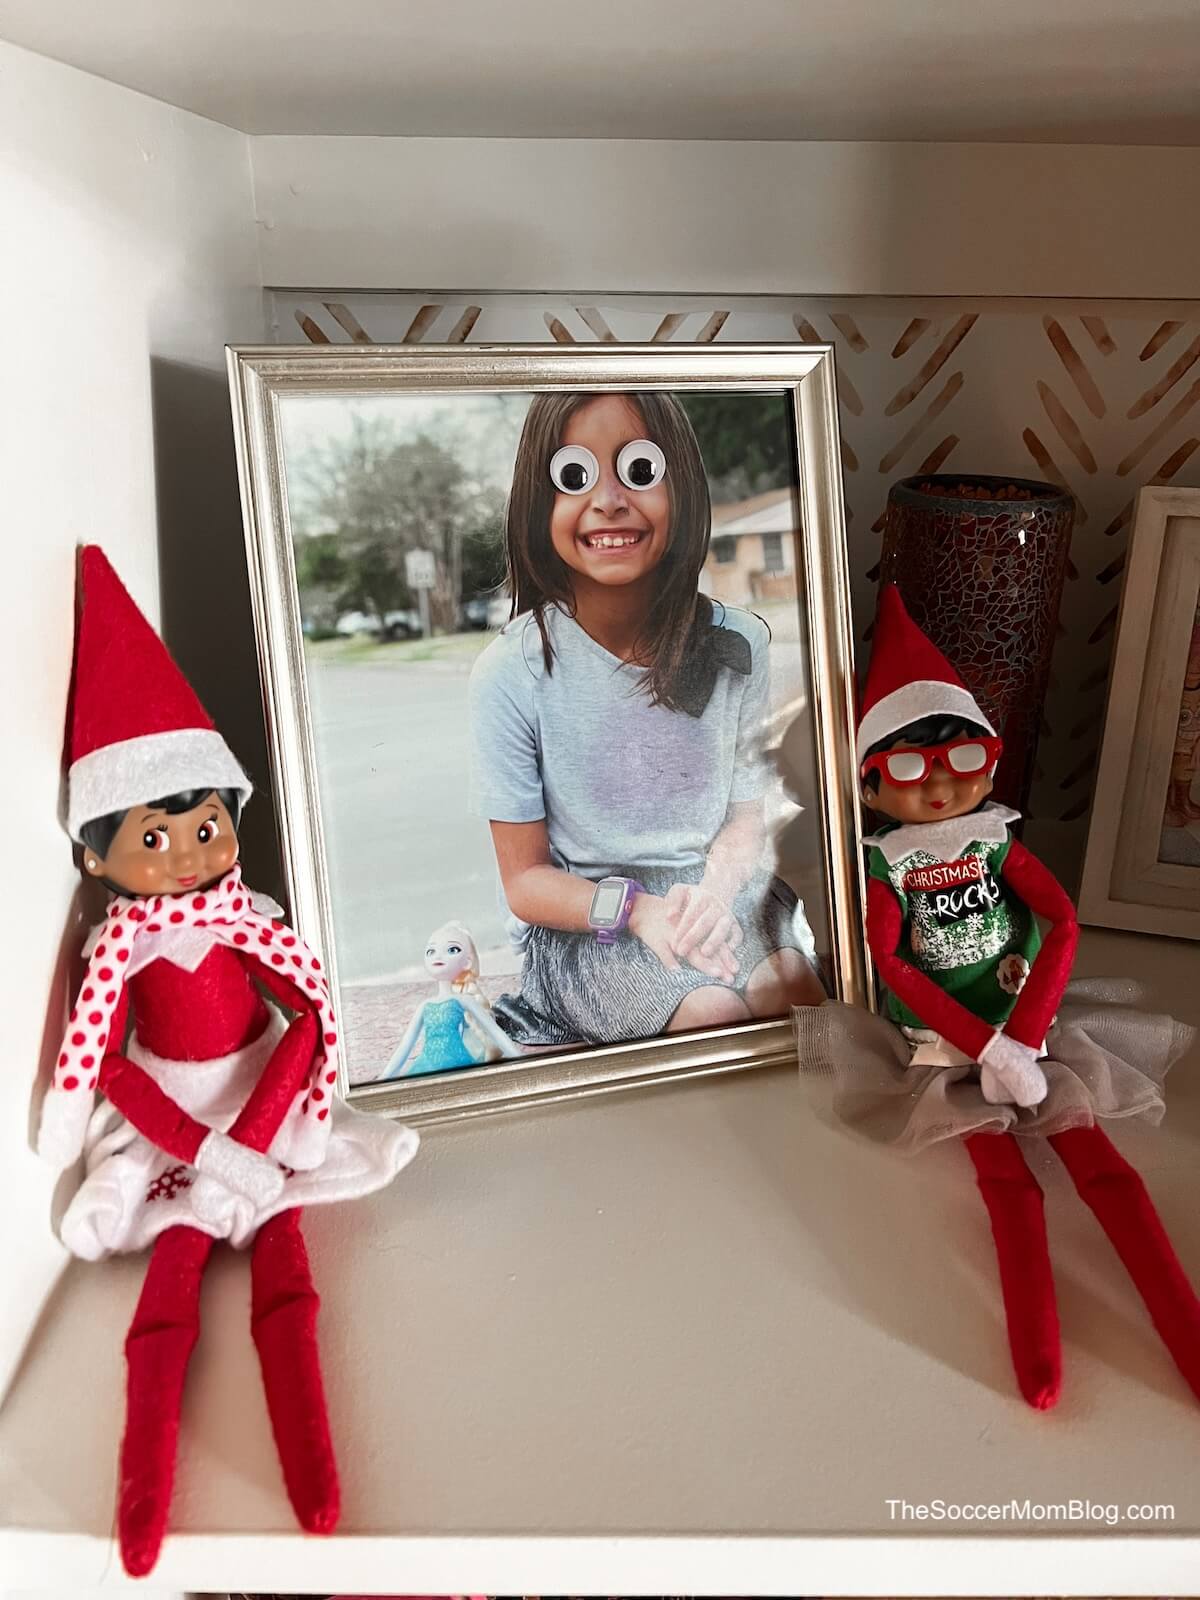 elves next to a photo of a girl with Google eyes.